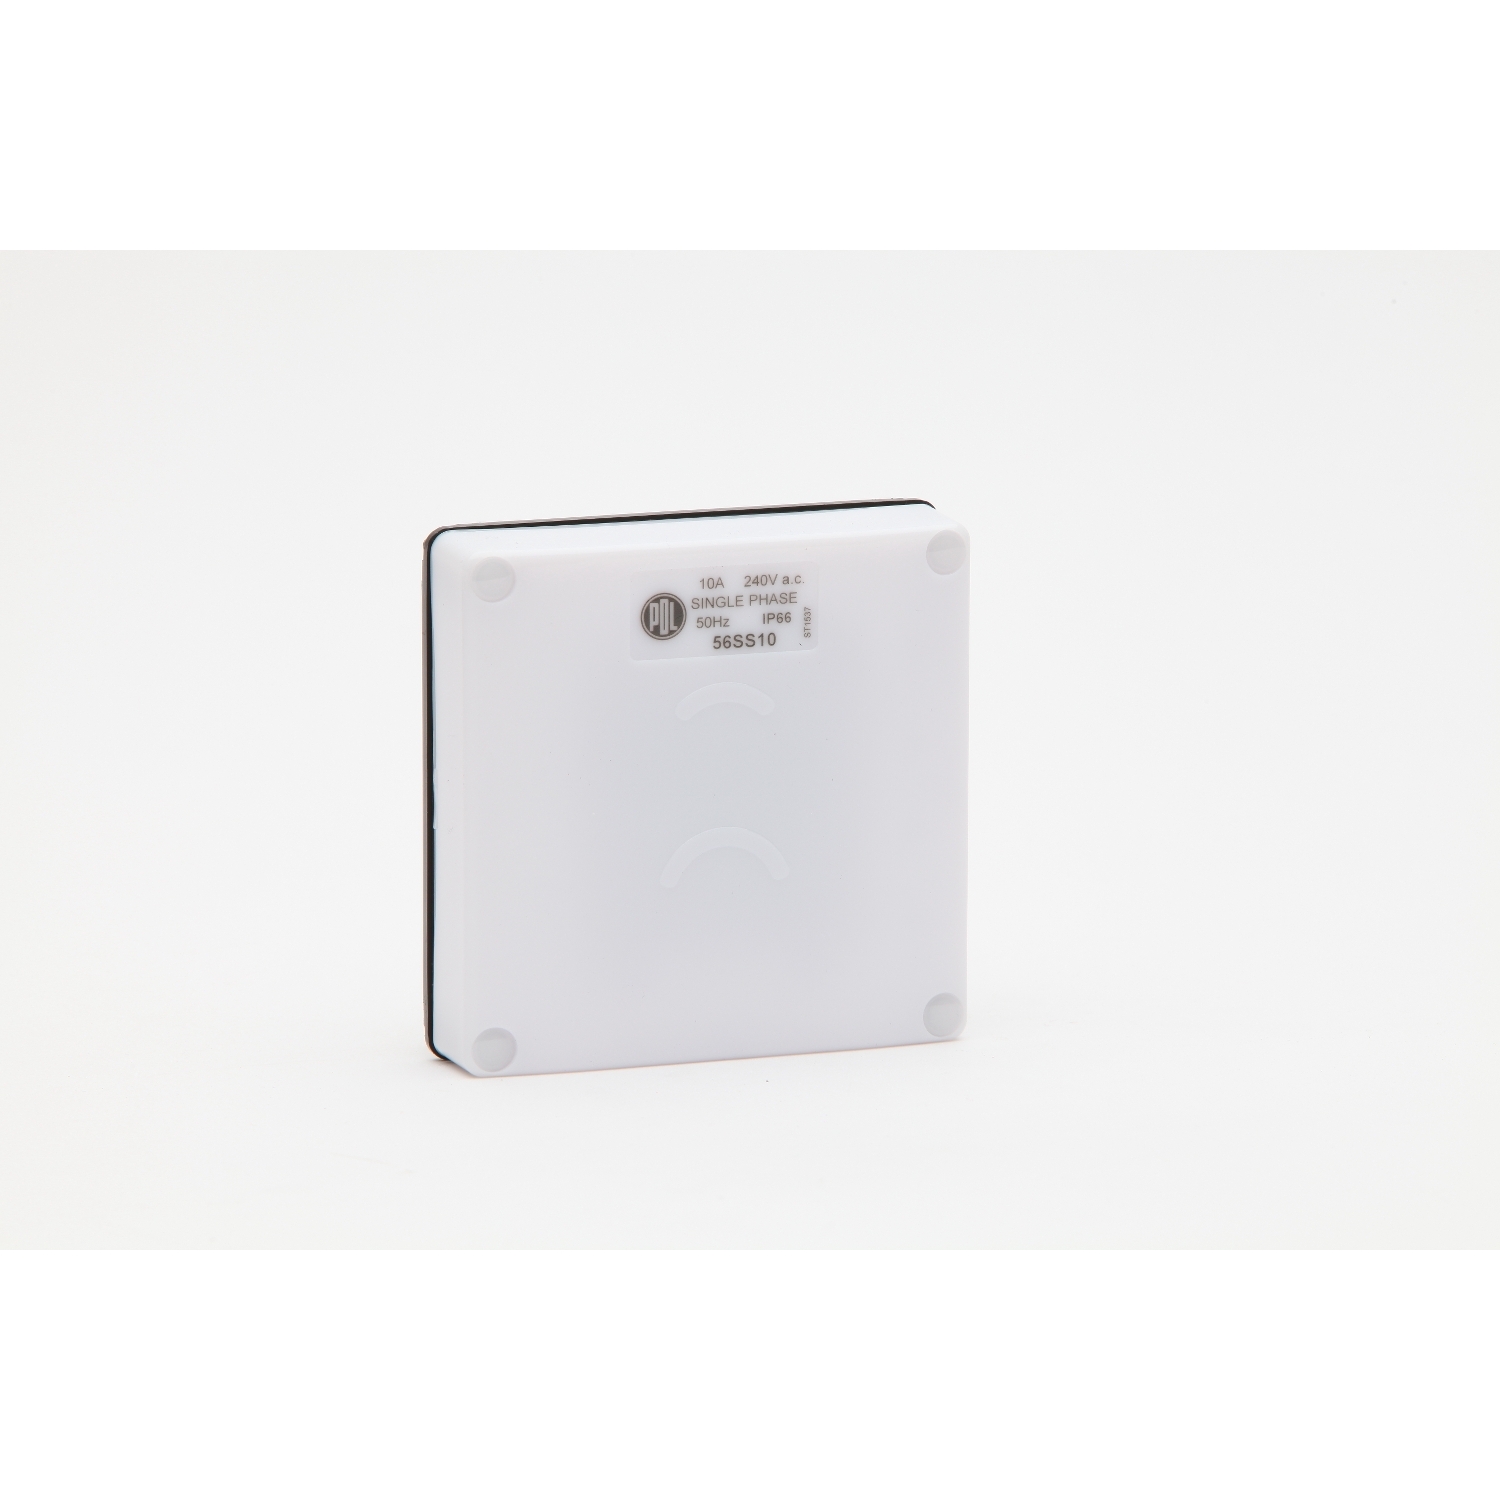 PDL 56 Series - Sunset Switch Photoelectric 10A 240V No Enclosure IP66 - Grey